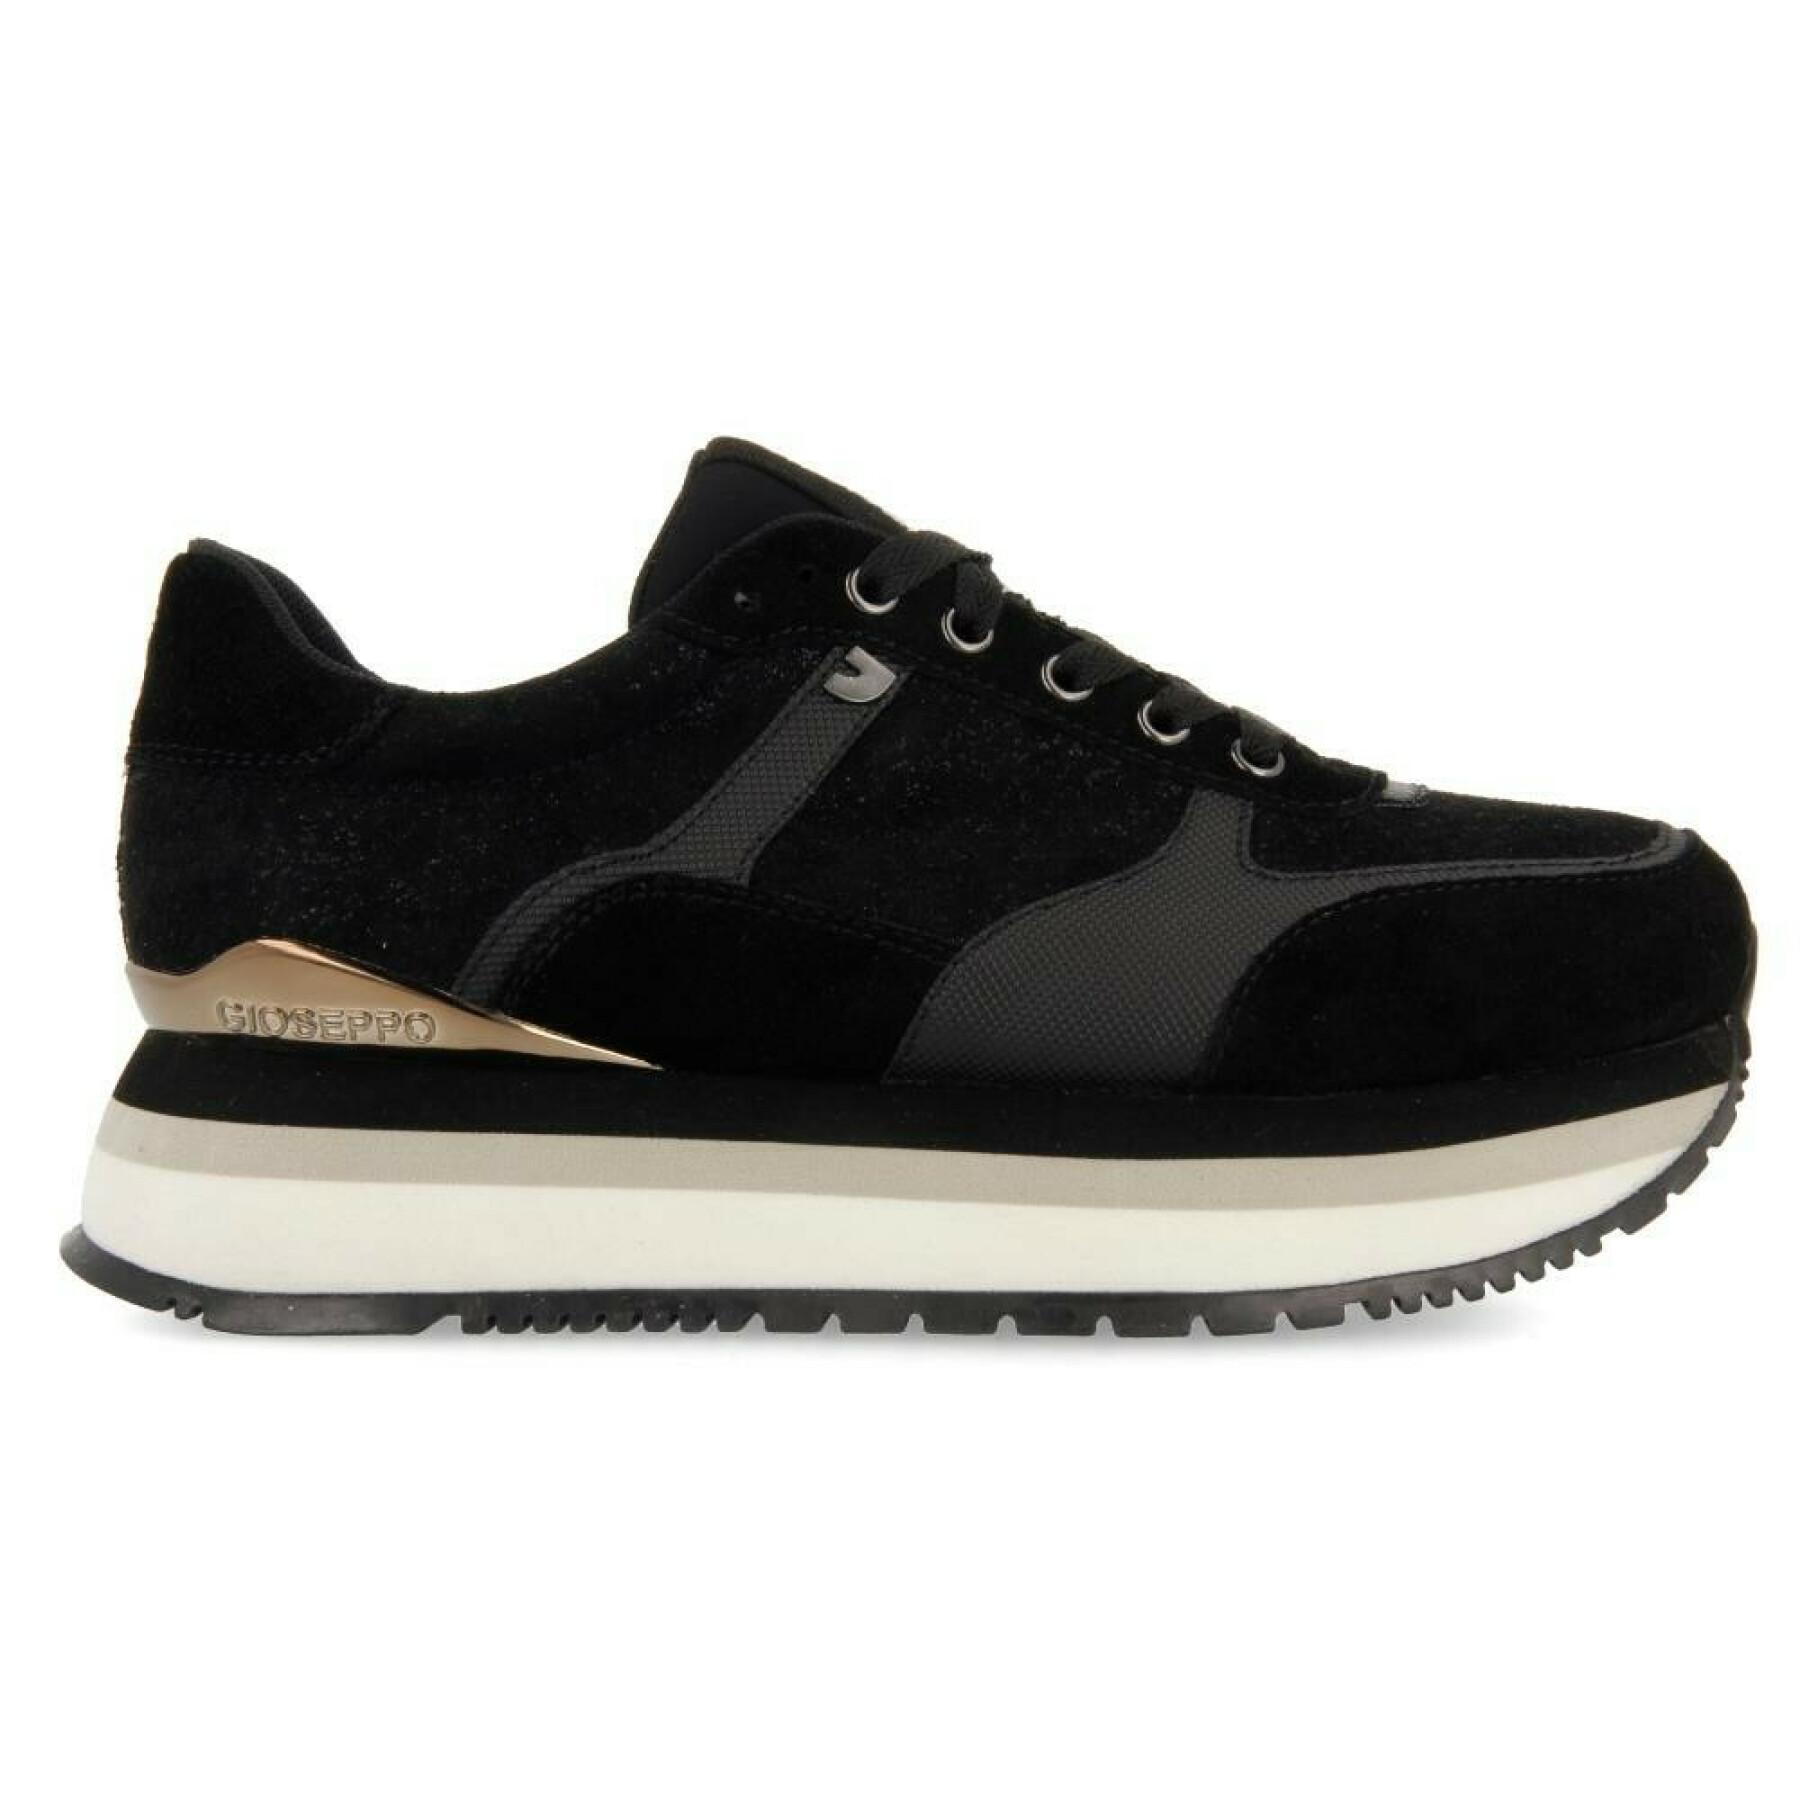 Women's sneakers Gioseppo Aussee